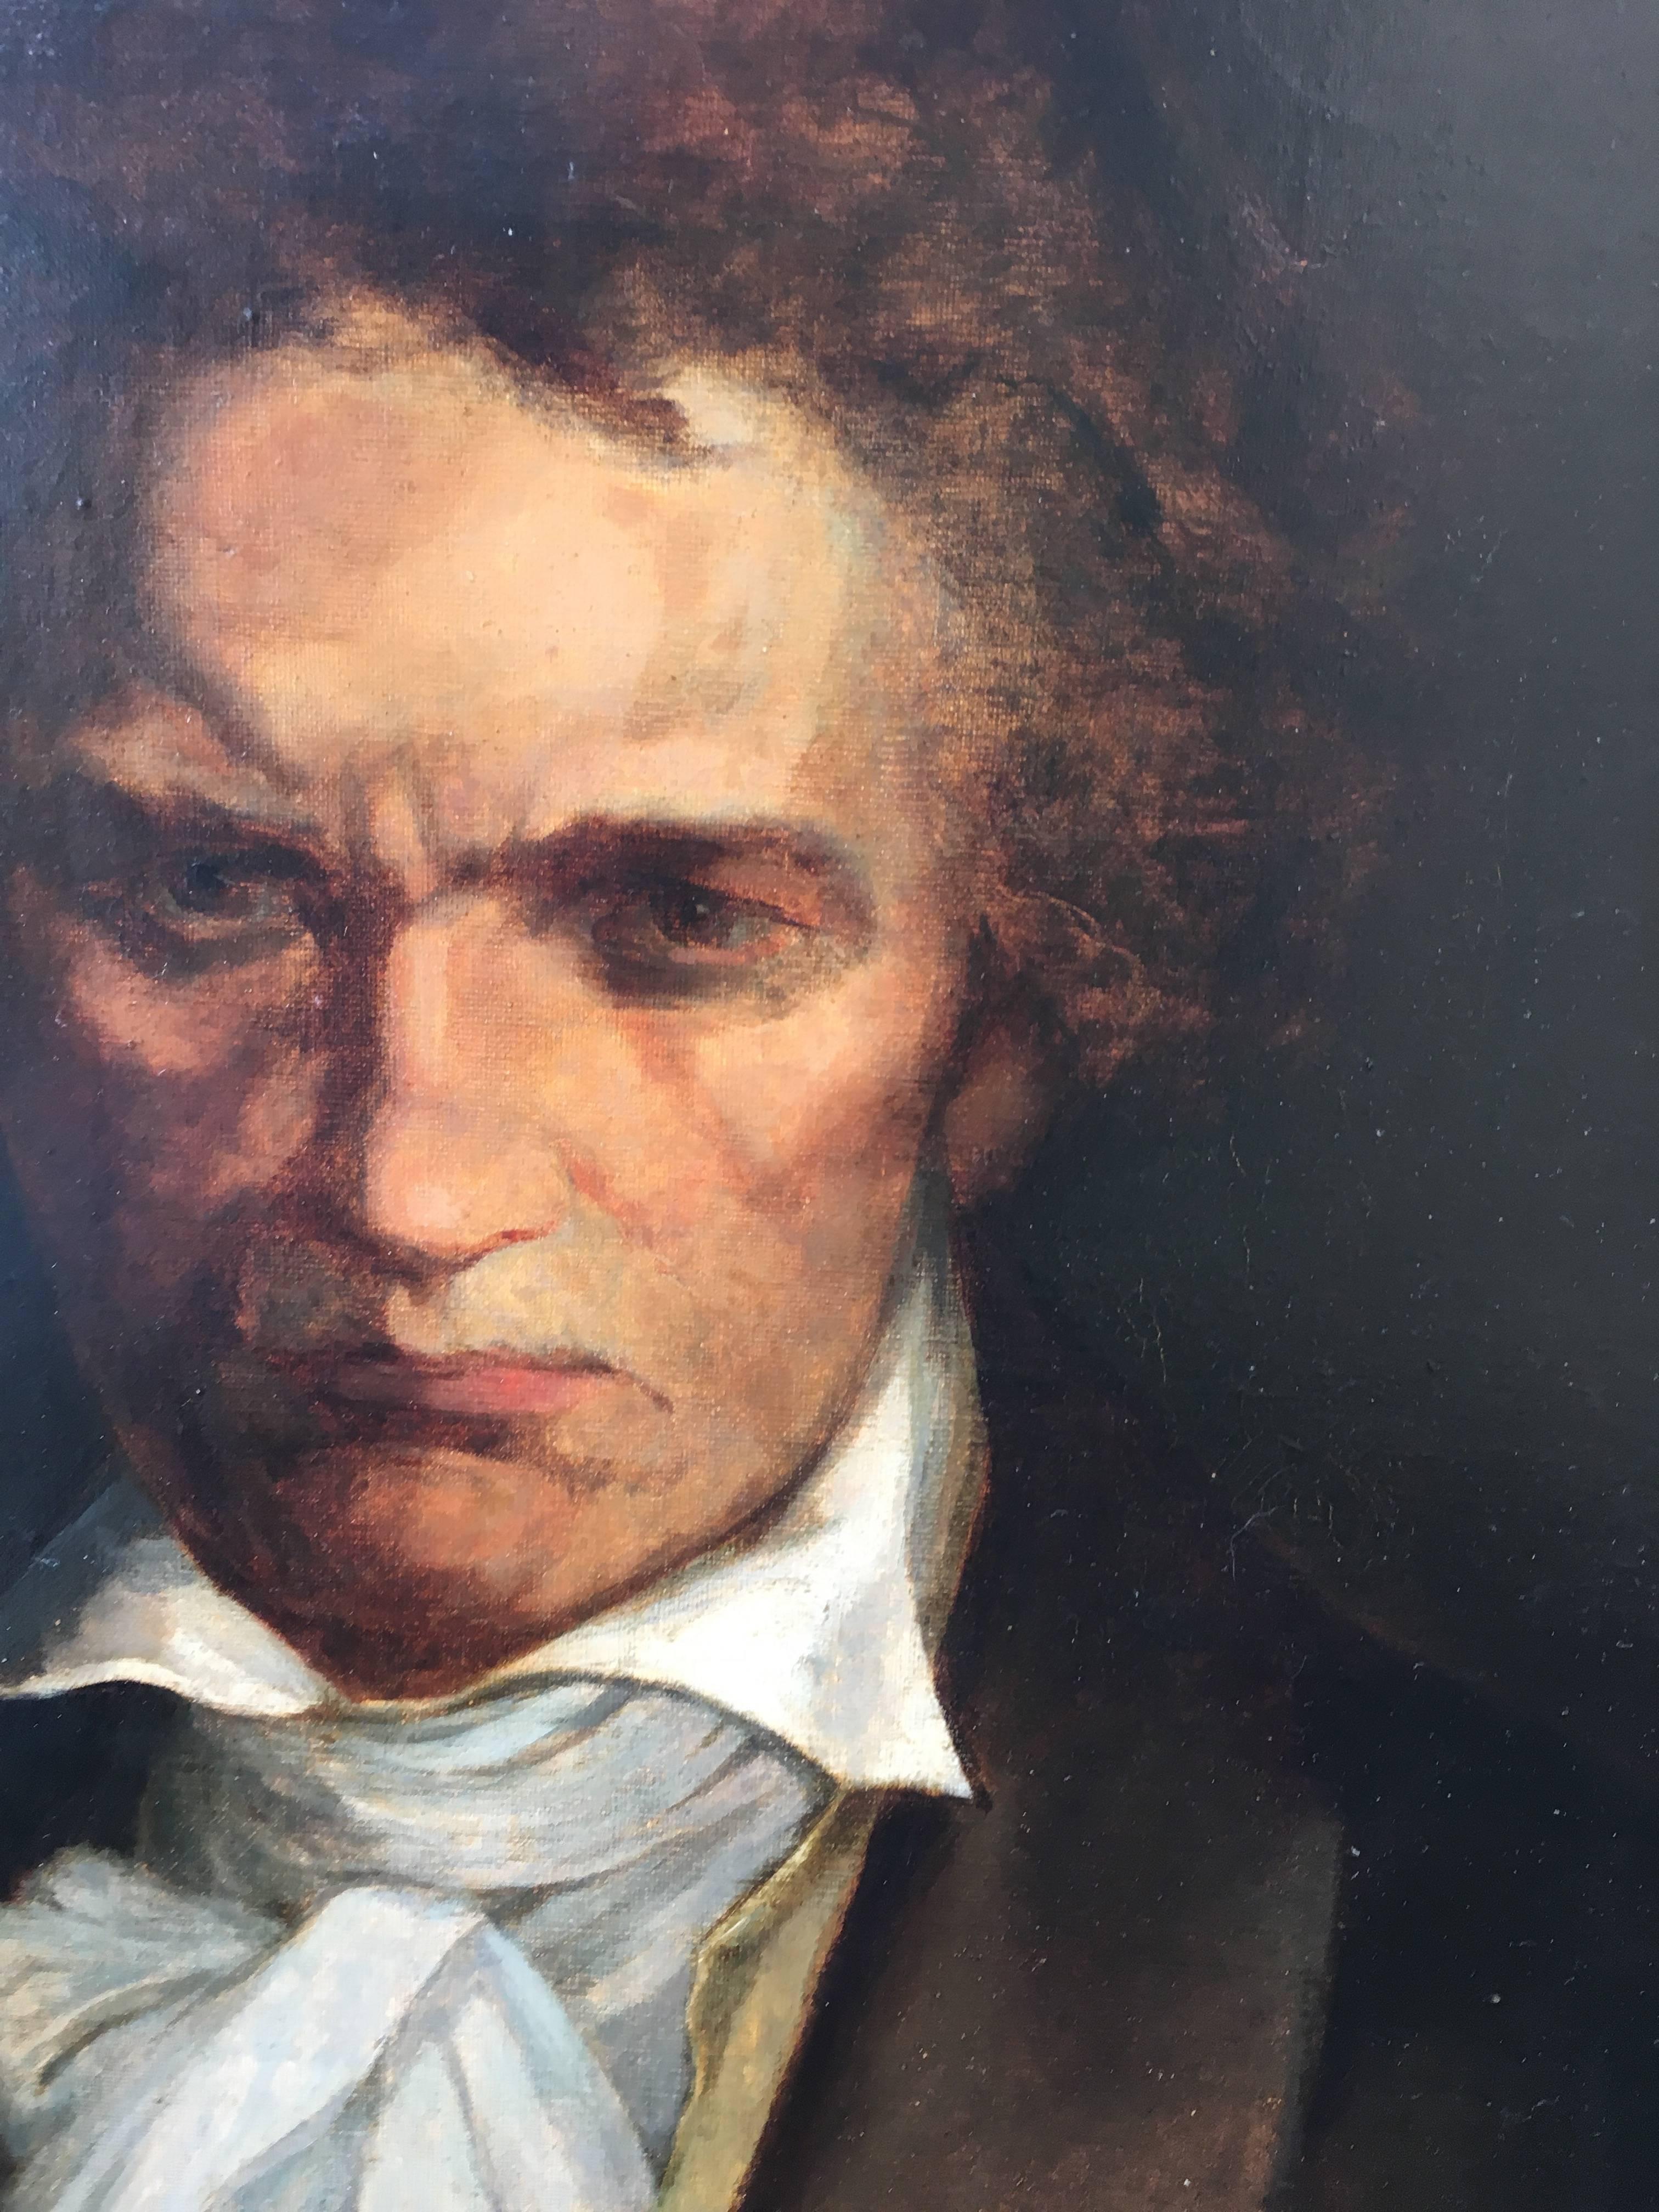 Ludwig von Beethoven Portrait - Painting by Frank Duveneck